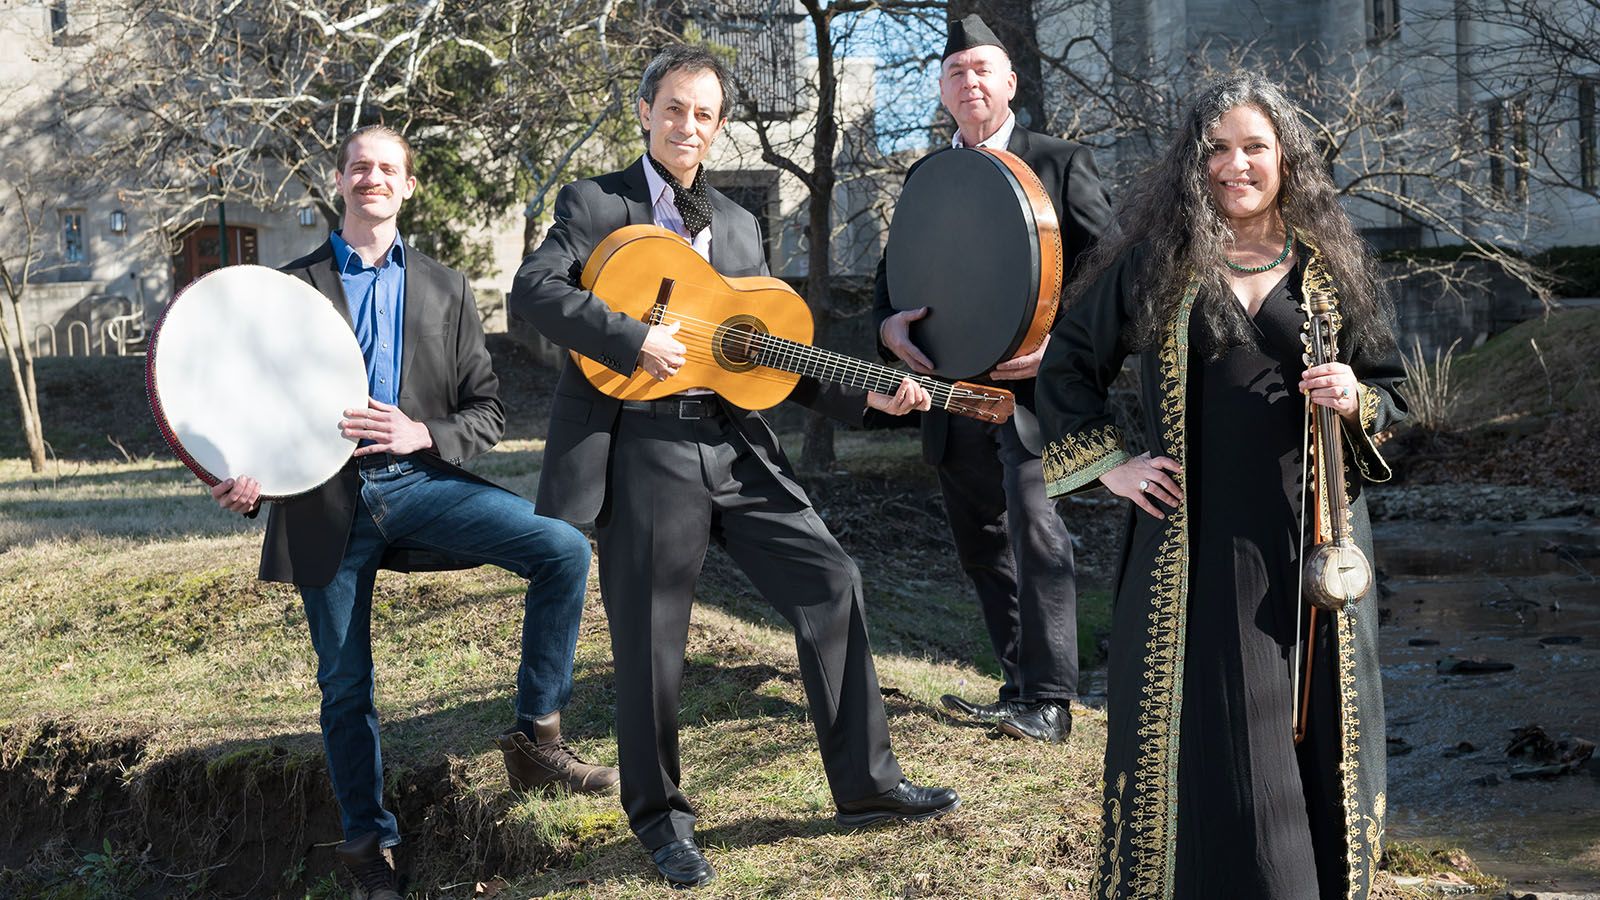 Bloomington-based band Salaam will perform at Arab Fest on June 3 and June 4 at Headwaters Park.